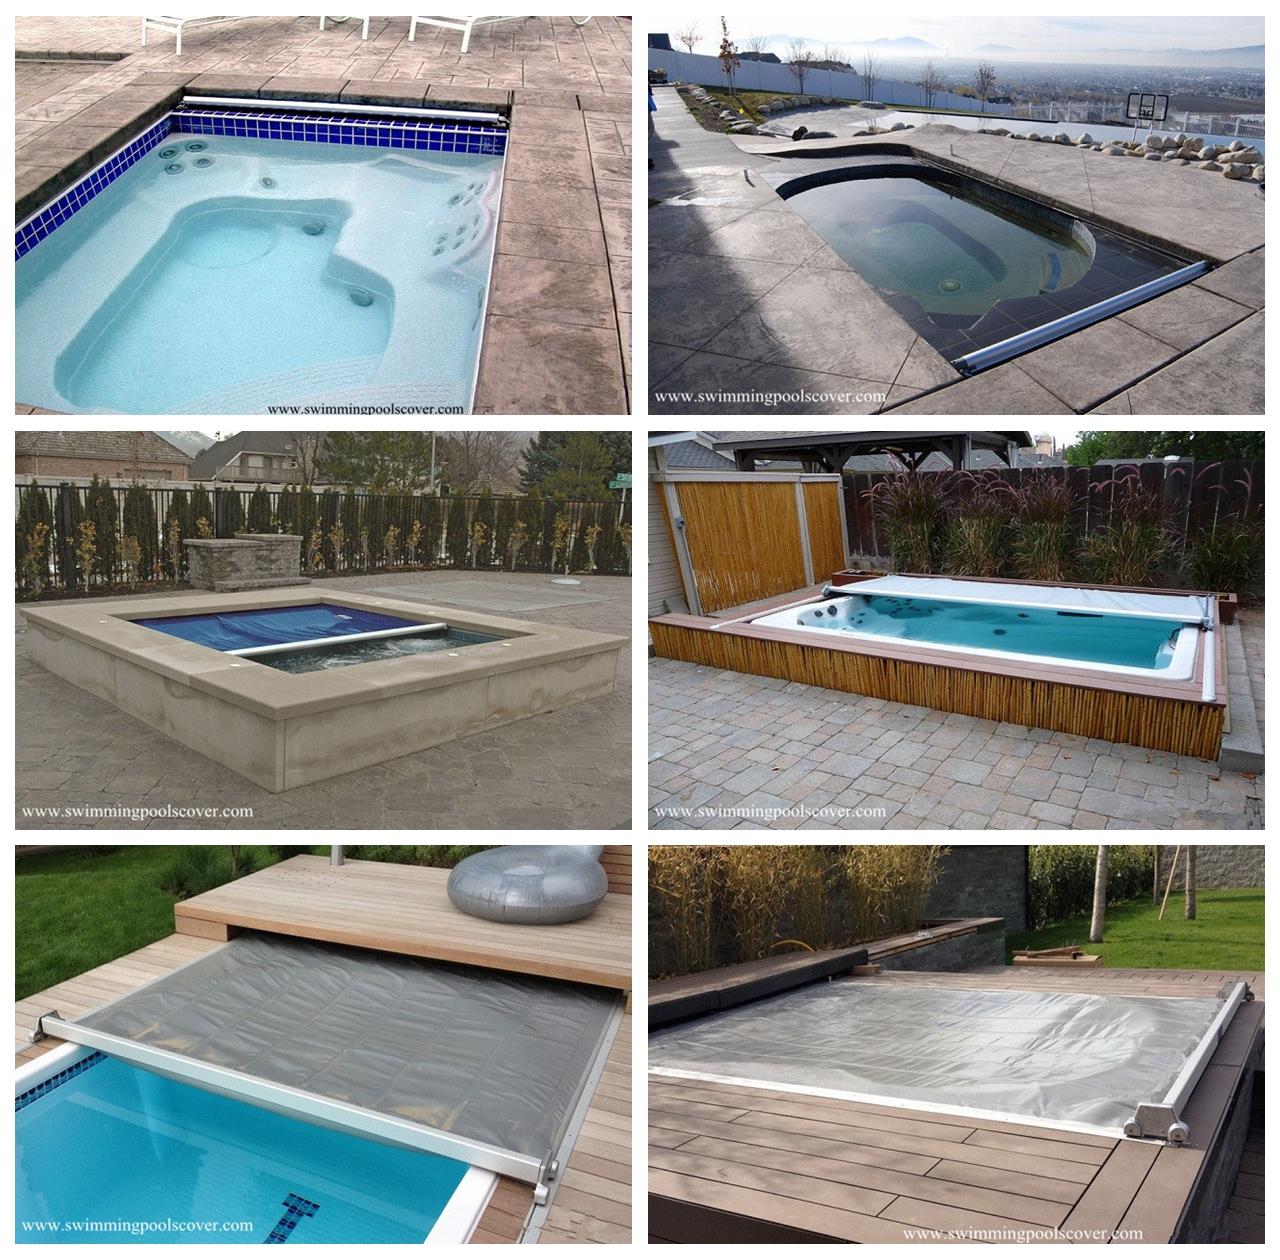 Automatic SPA Pool Covers Outdoor for Winter.jpg